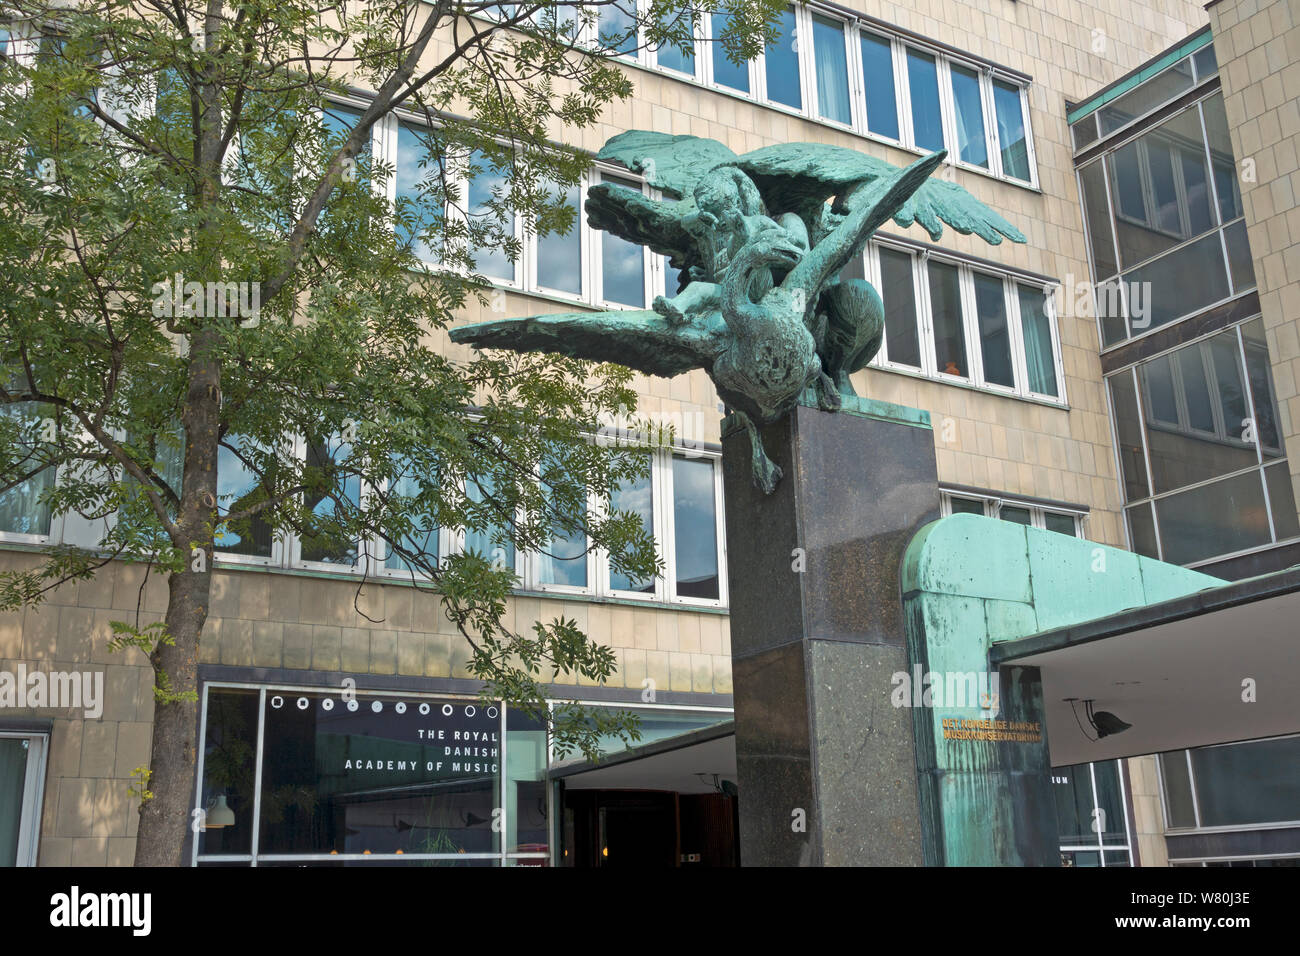 The radiofon sculpture in front of the old Radio House in Copenhagen, now the Royal Danish Academy of Music. Sculpture by sculptor Mogens Bøggild. Stock Photo